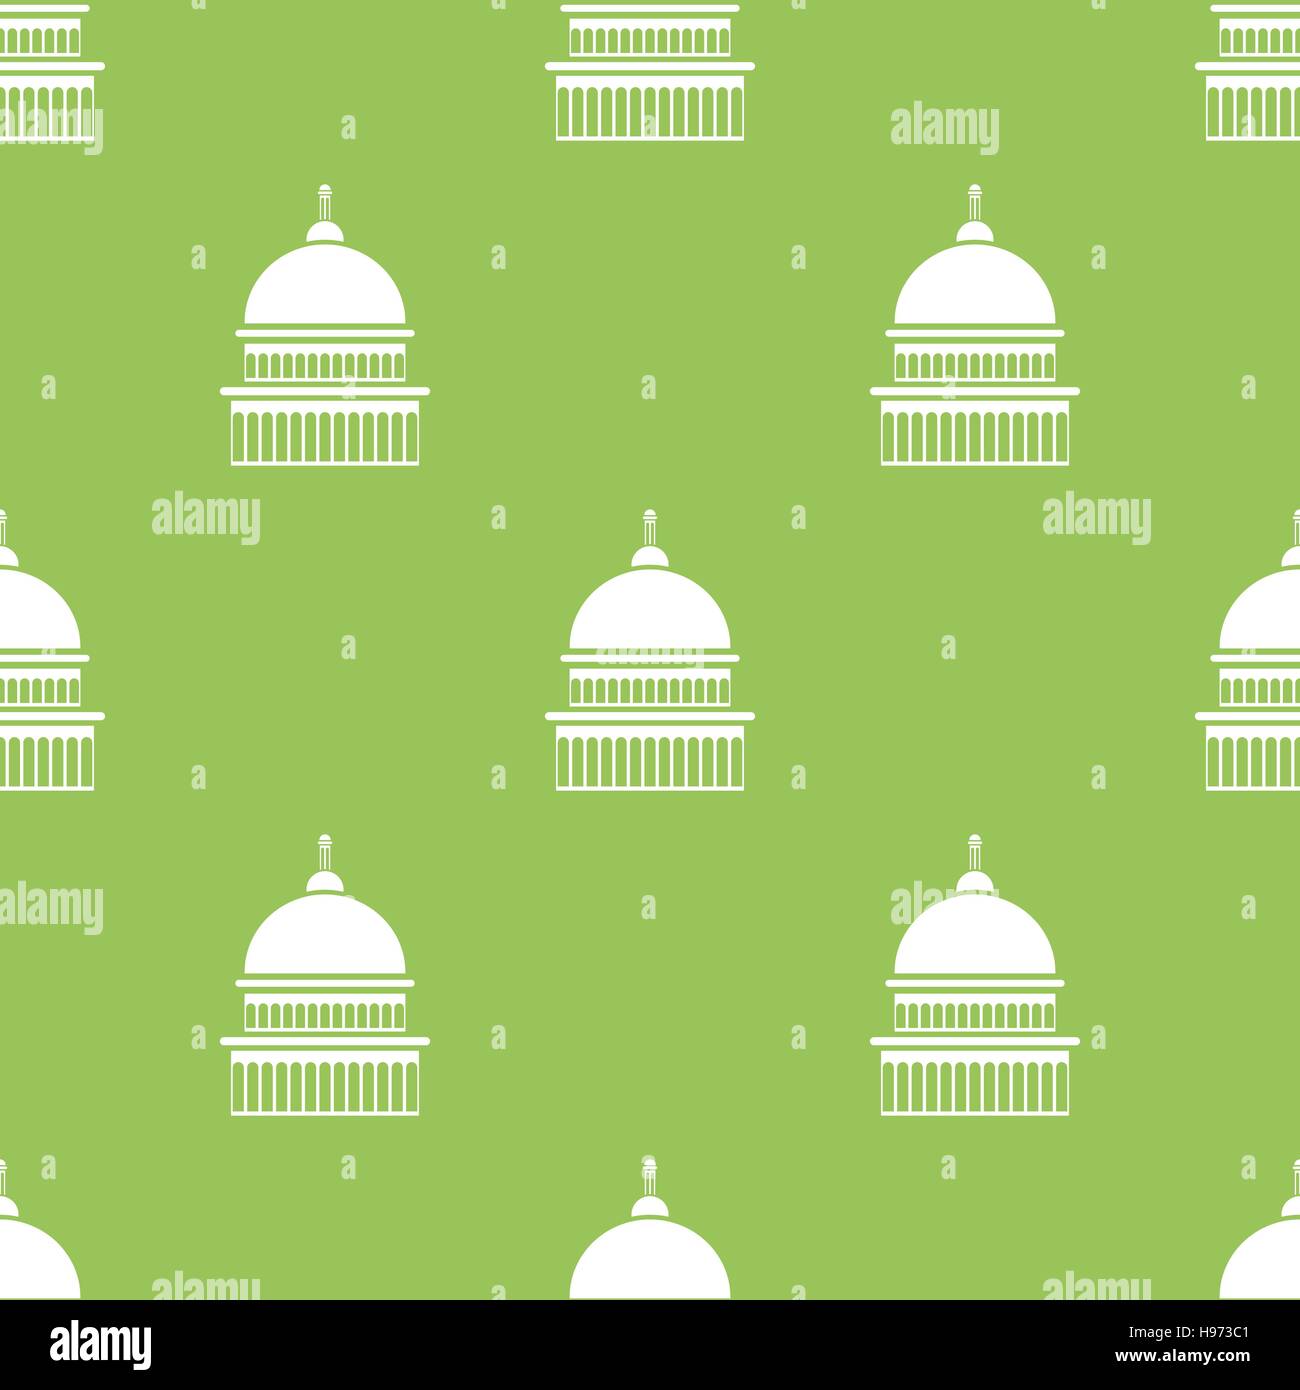 Capitol Icon Seamless Pattern Stock Vector